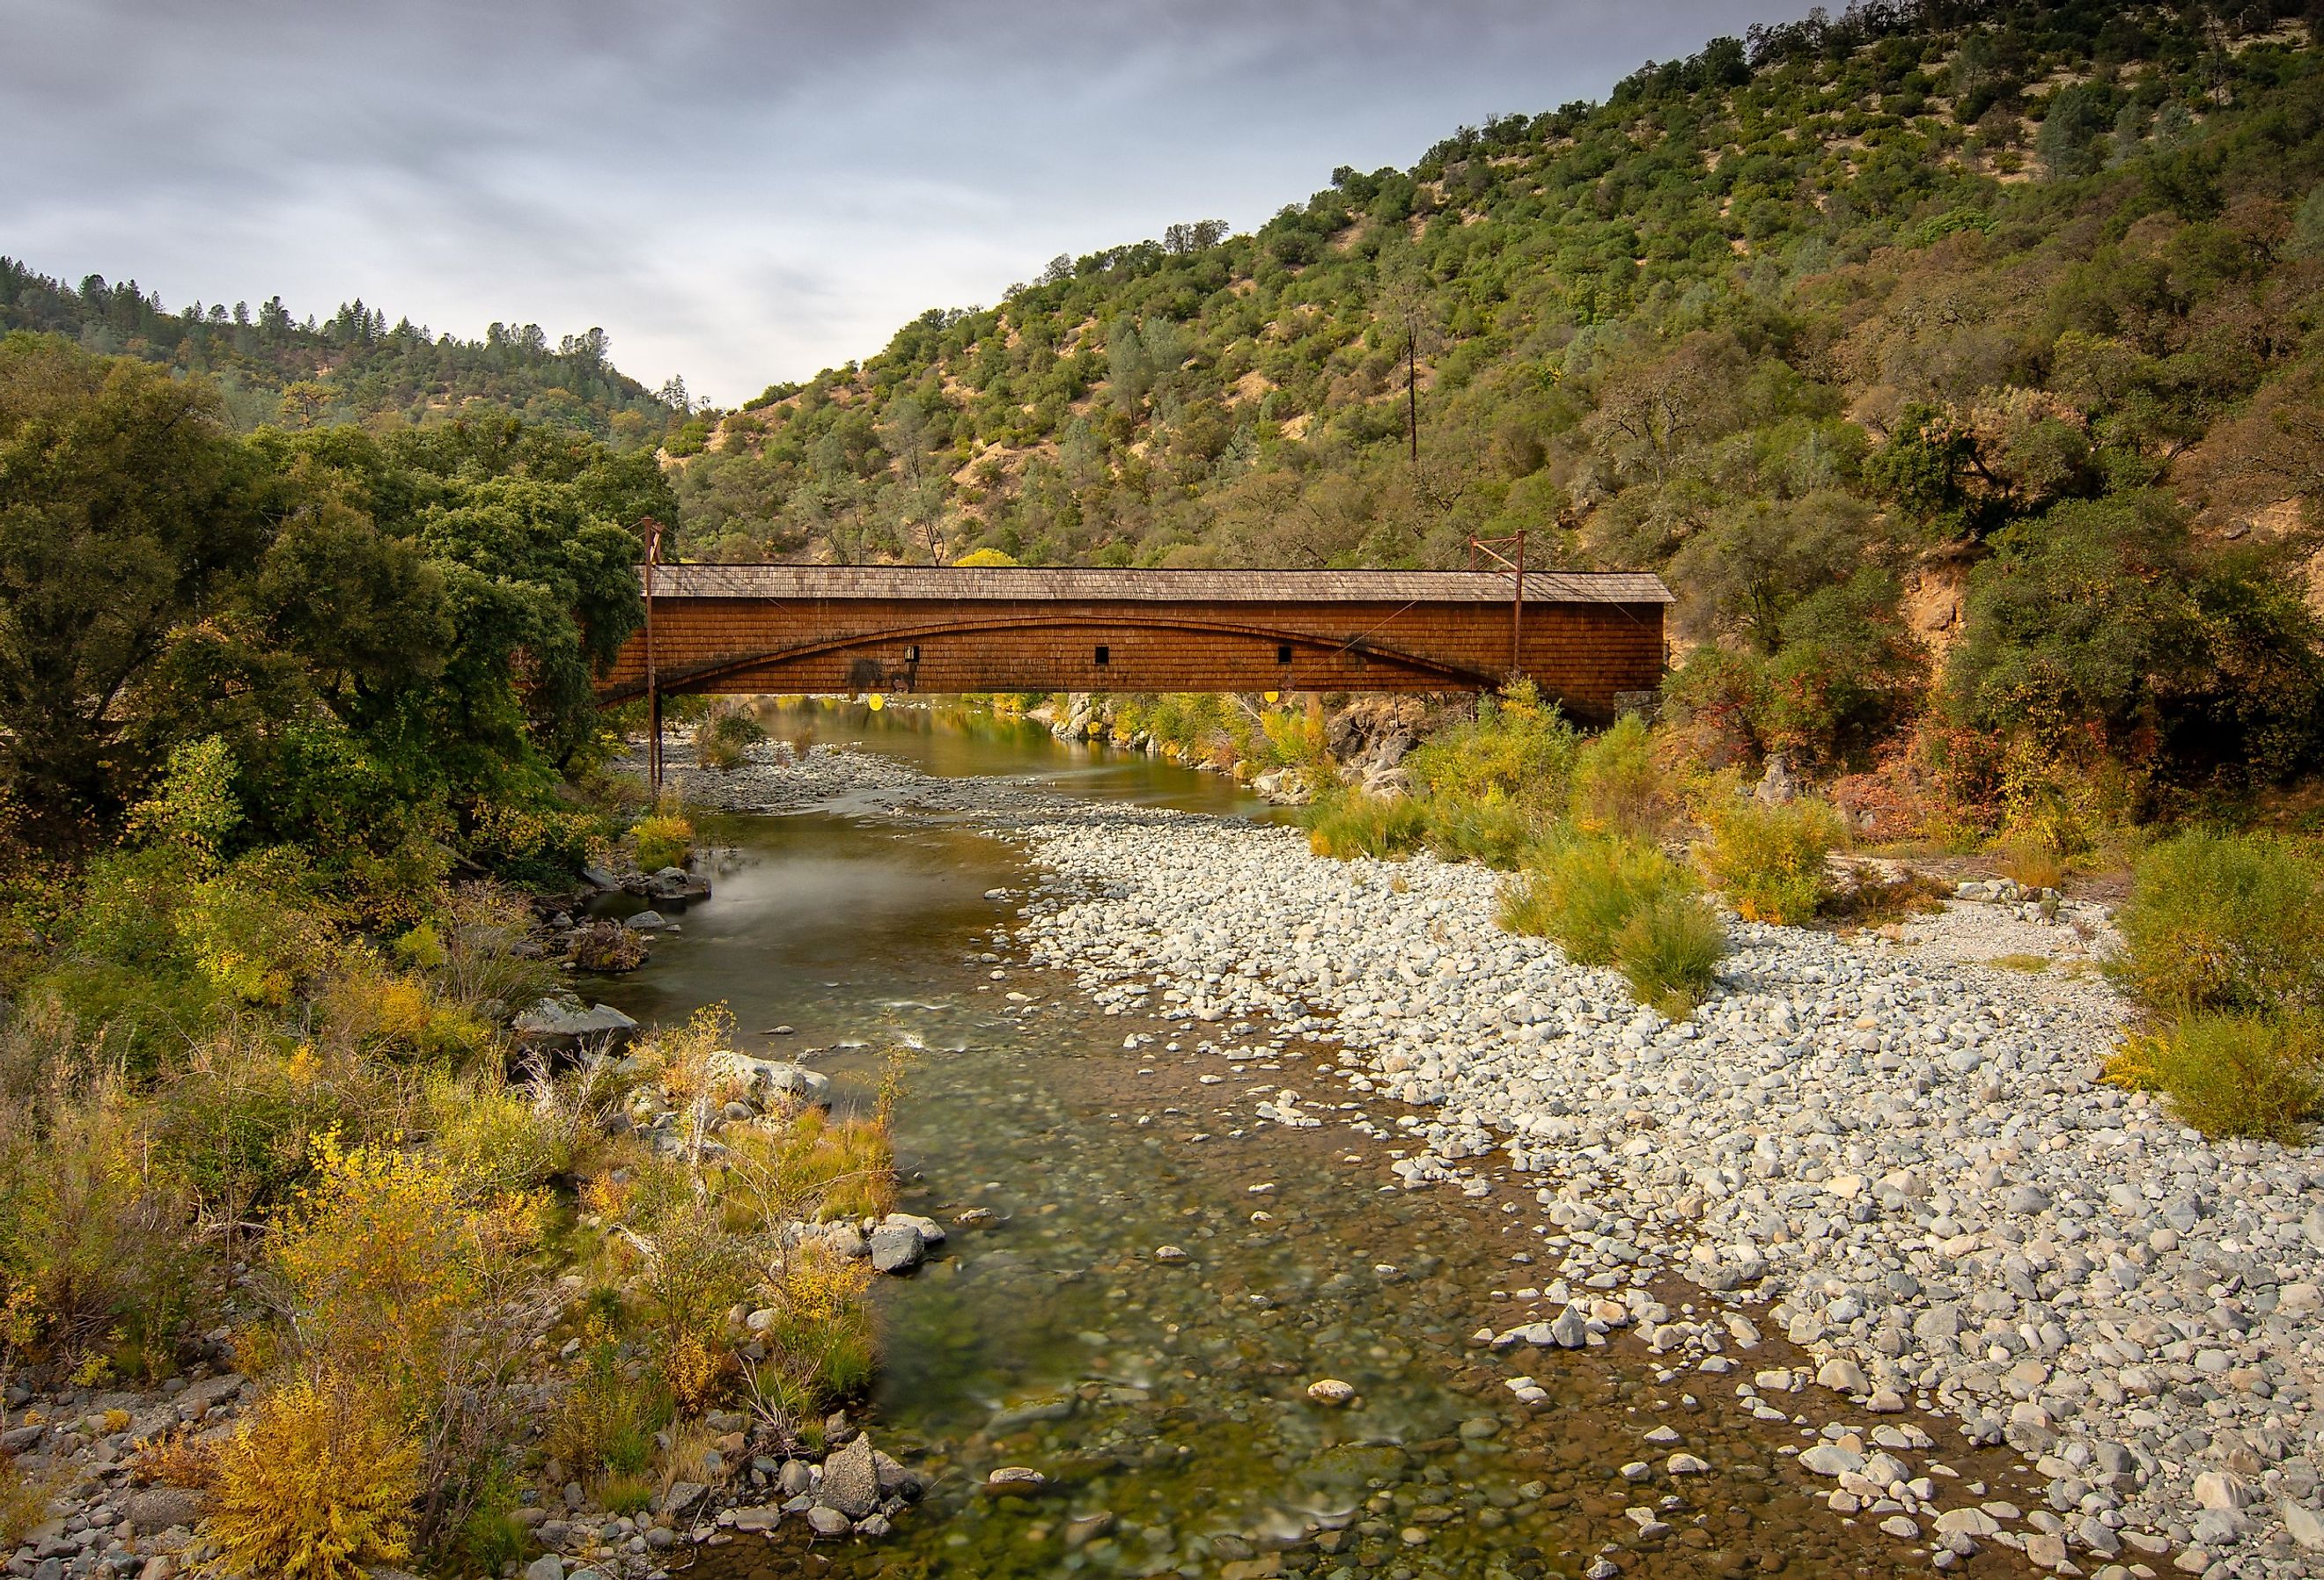 Side view of the Bridgeport Covered Bridge at South Yuba River in California, USA, in the autumn. This bridge has the longest clear span of any surviving covered bridge in the world